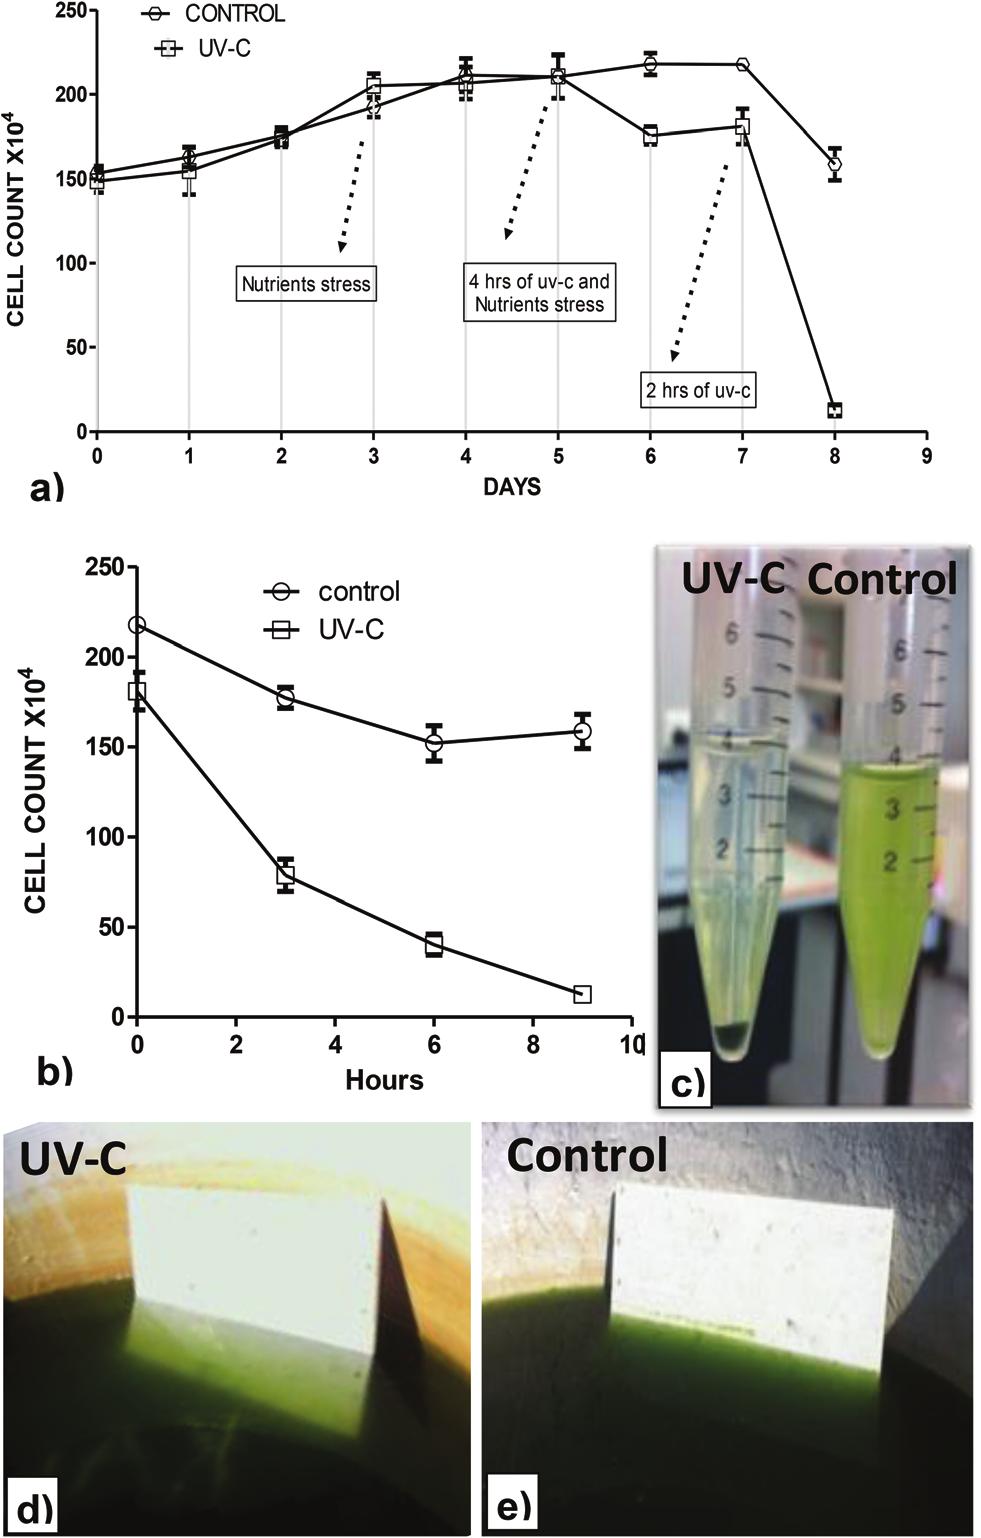 View Article Online Published on 09 May 2014. Downloaded by University of Queensland on 09/02/2015 00:50:01. Green Chemistry Paper two pilot-scale 1000 L raceways ponds (ESI Fig. 7 ).